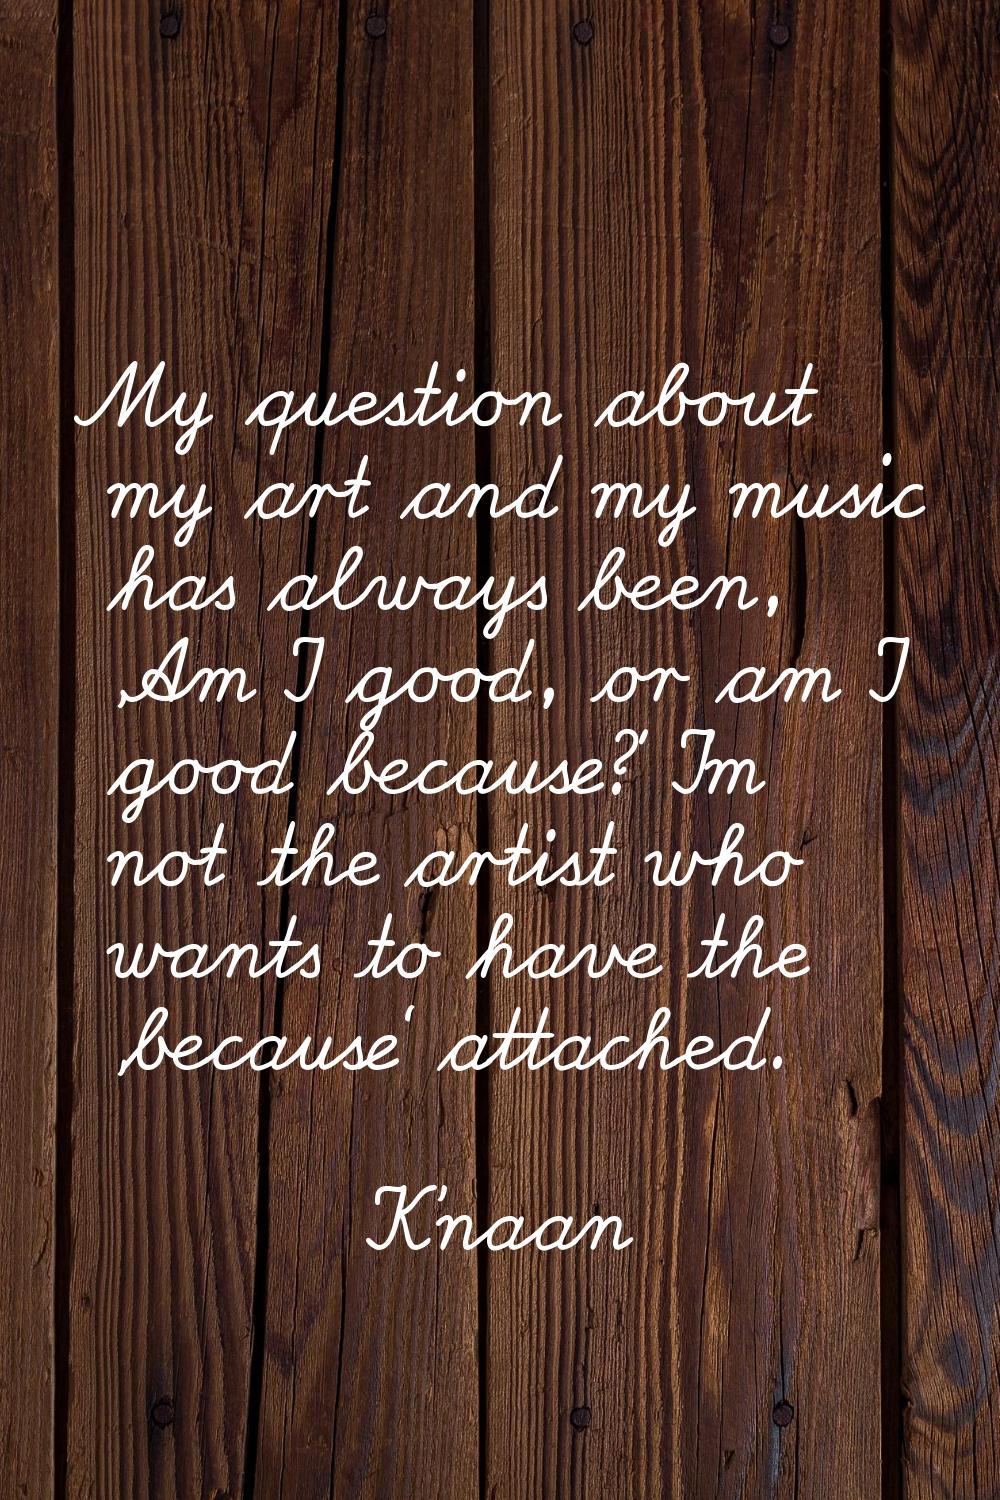 My question about my art and my music has always been, 'Am I good, or am I good because?' I'm not t